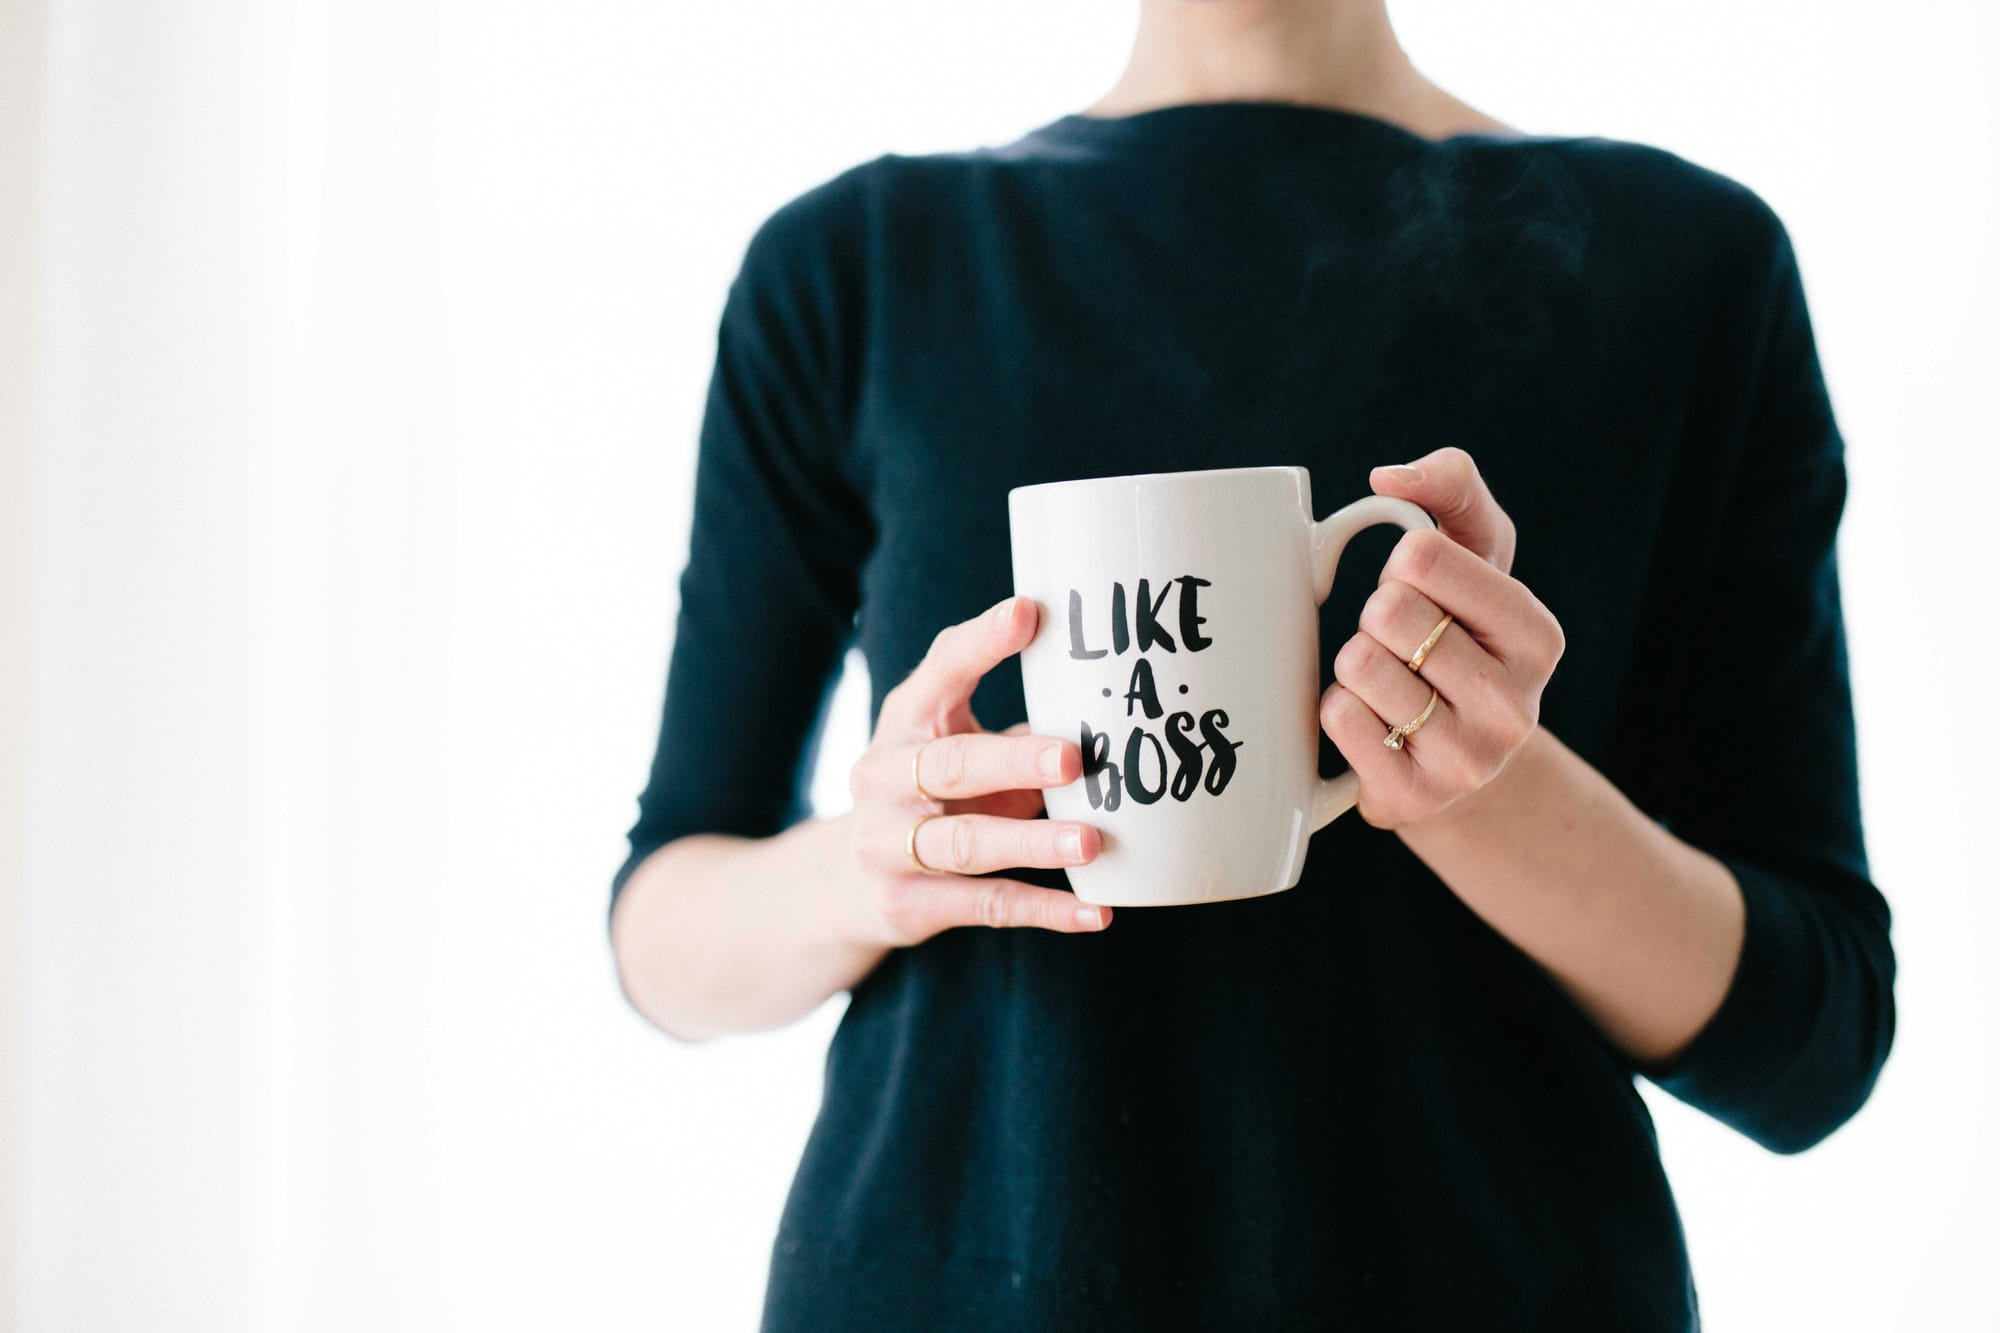 Women Holding the Like a Boss Cup - Content Automation Services